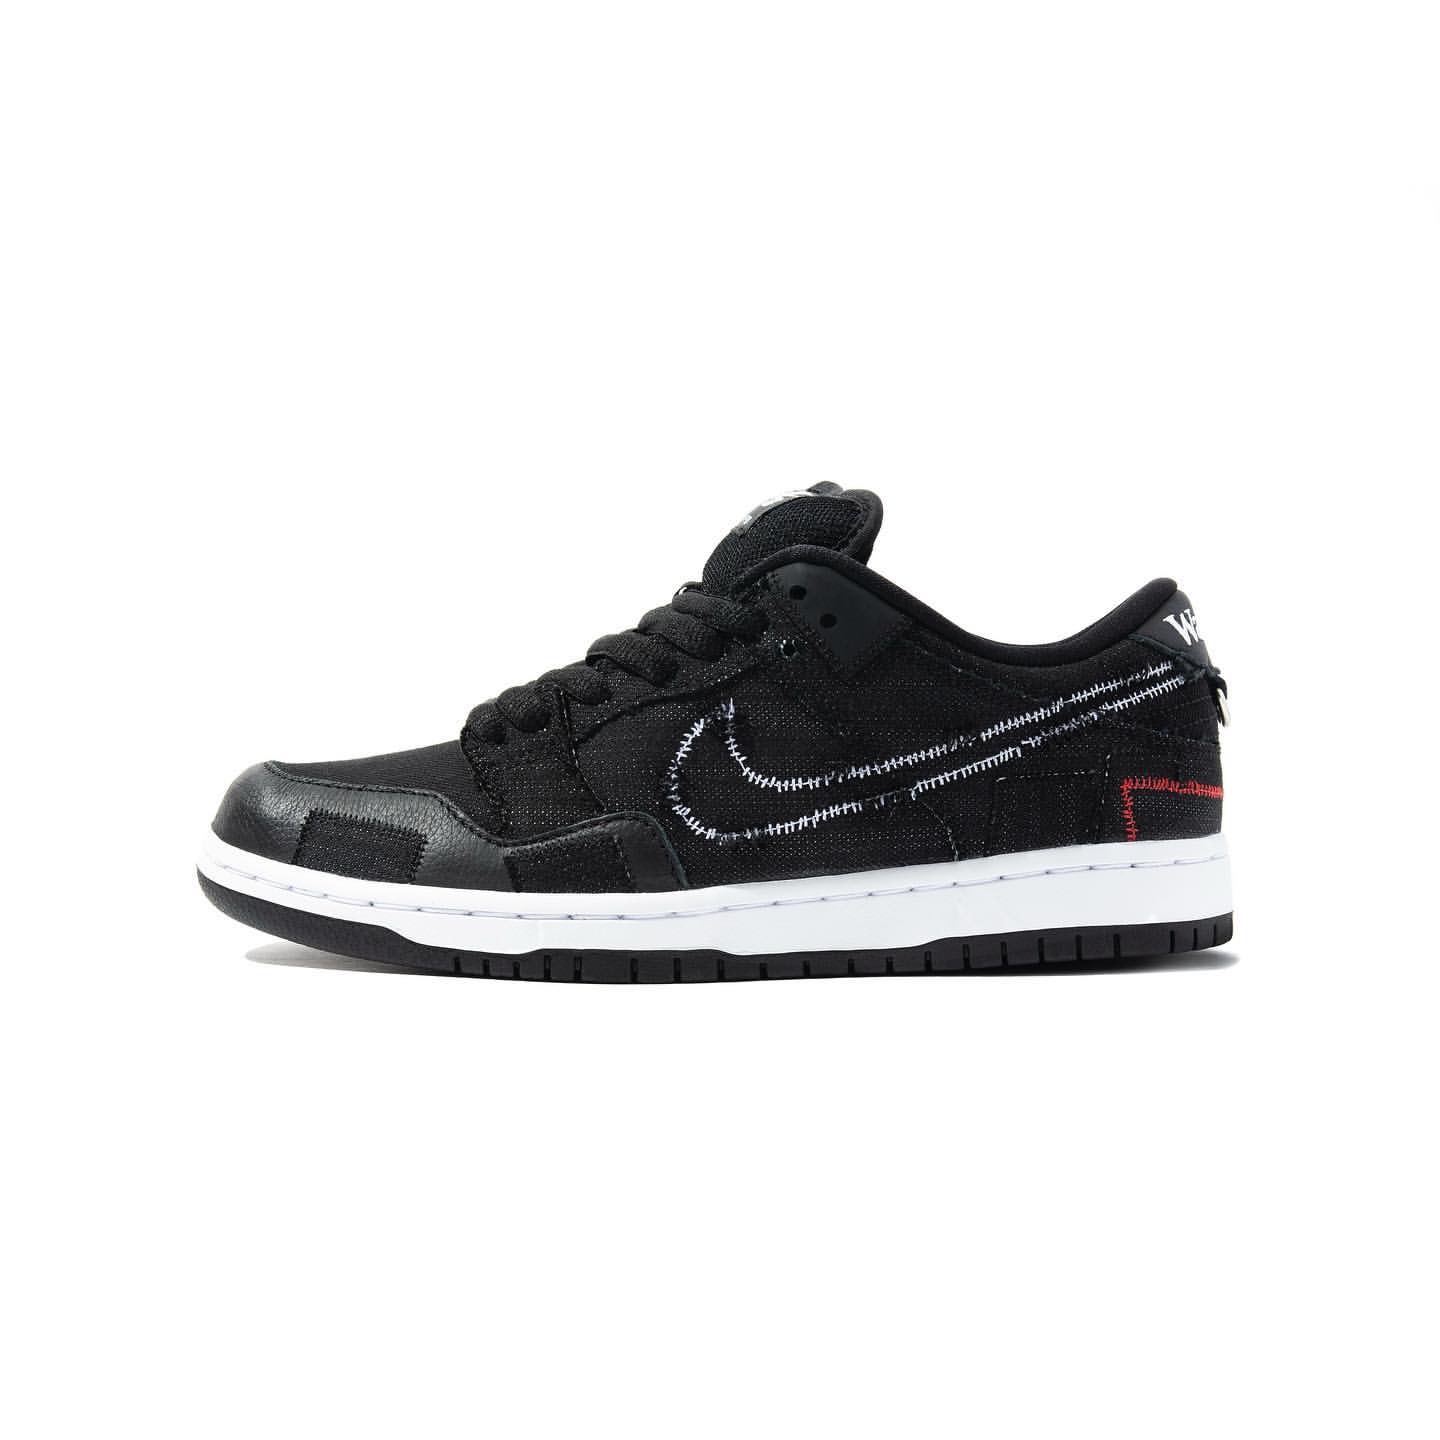 WASTED YOUTH × NIKE SB DUNK LOW